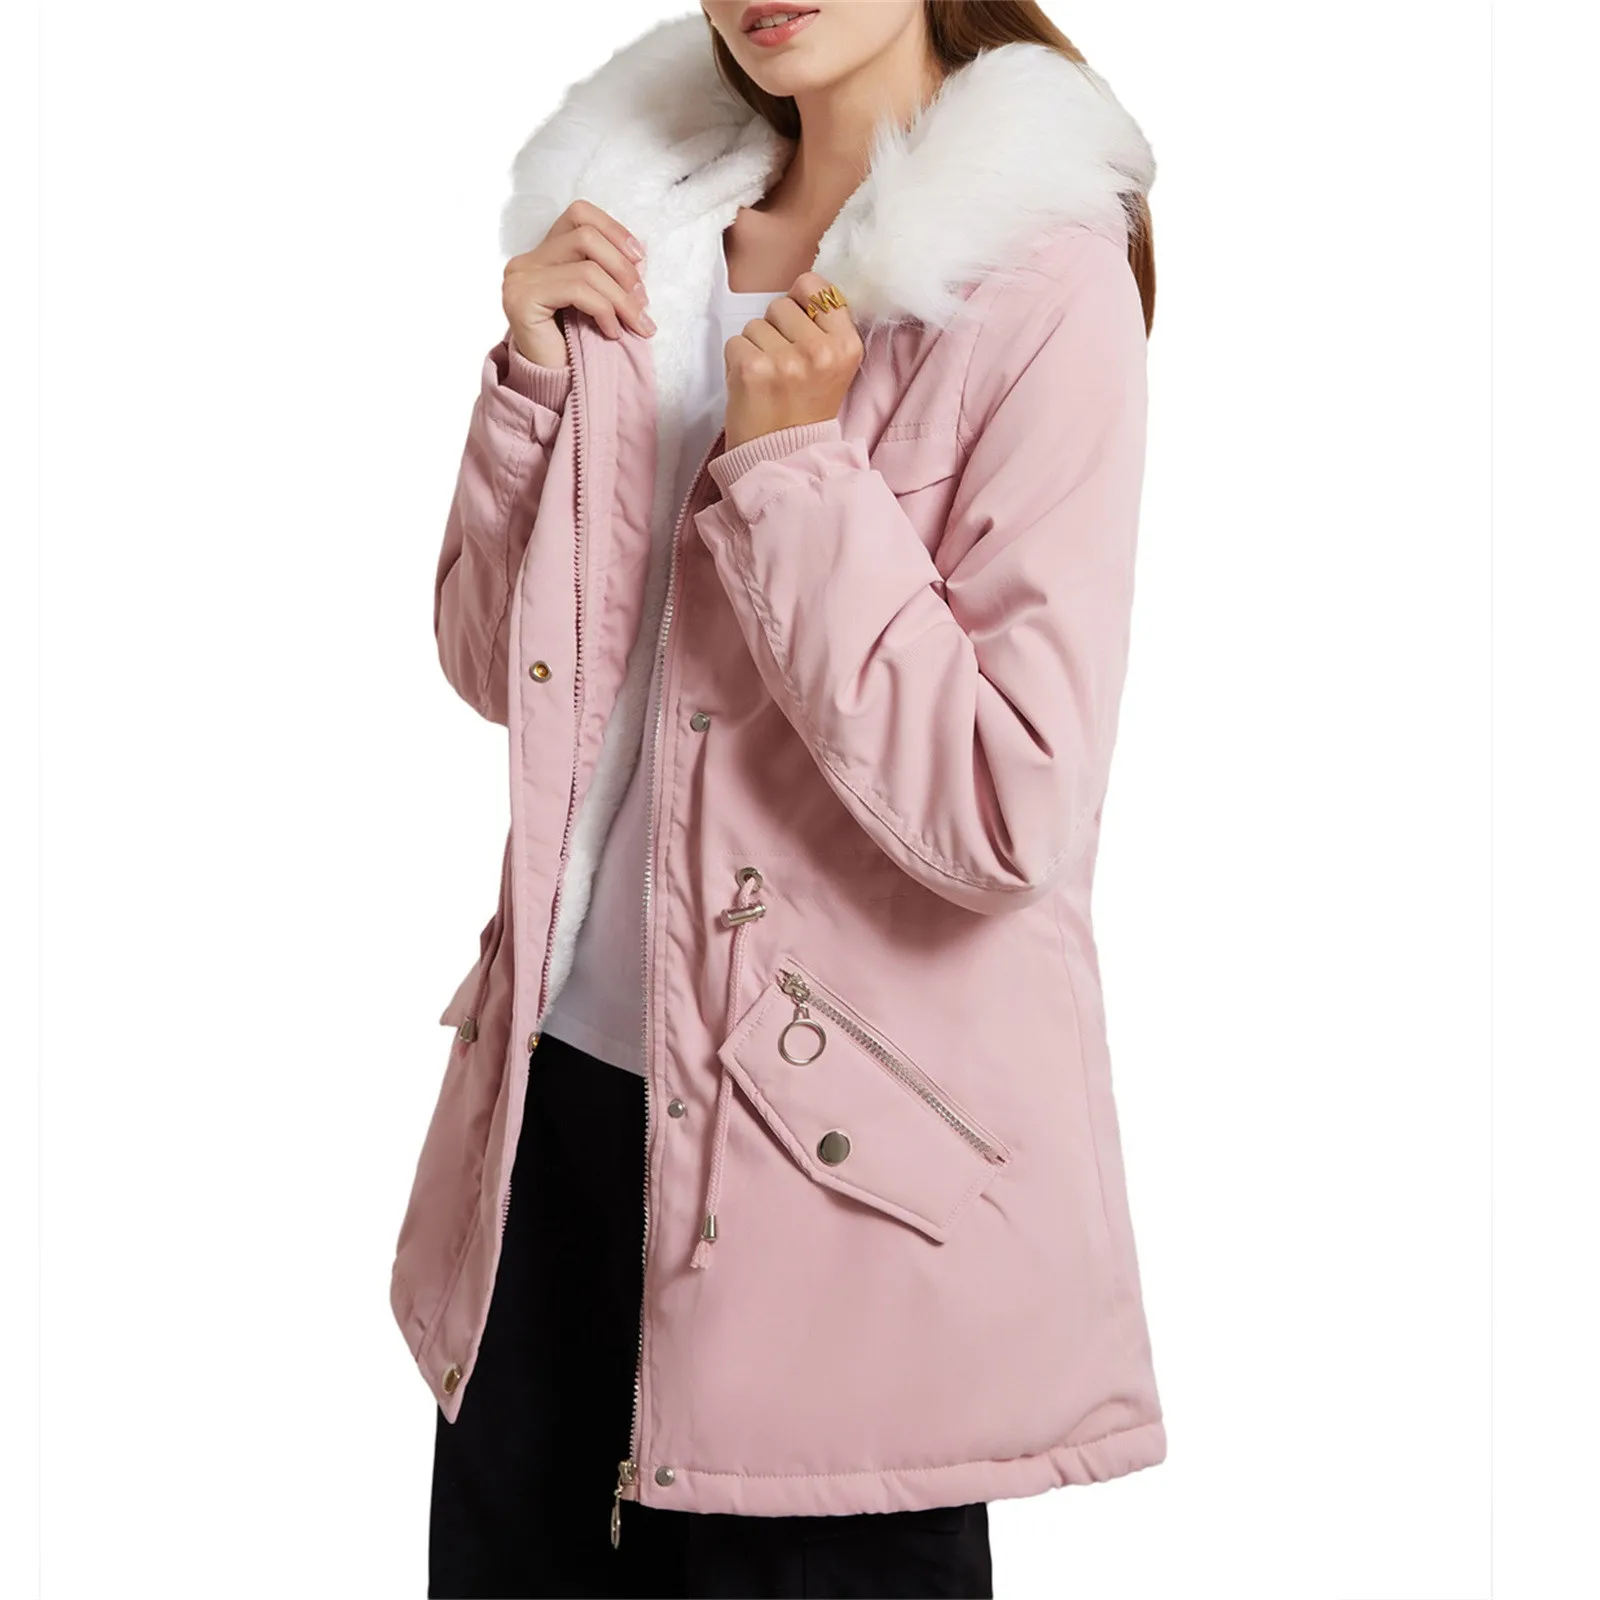 

Women's Warm Hooded Jacket, Outwear Fur' Lined Cotton Padded Trench Coat, Spring Autumn Winter Outdoor Hooded Thick Overcoat